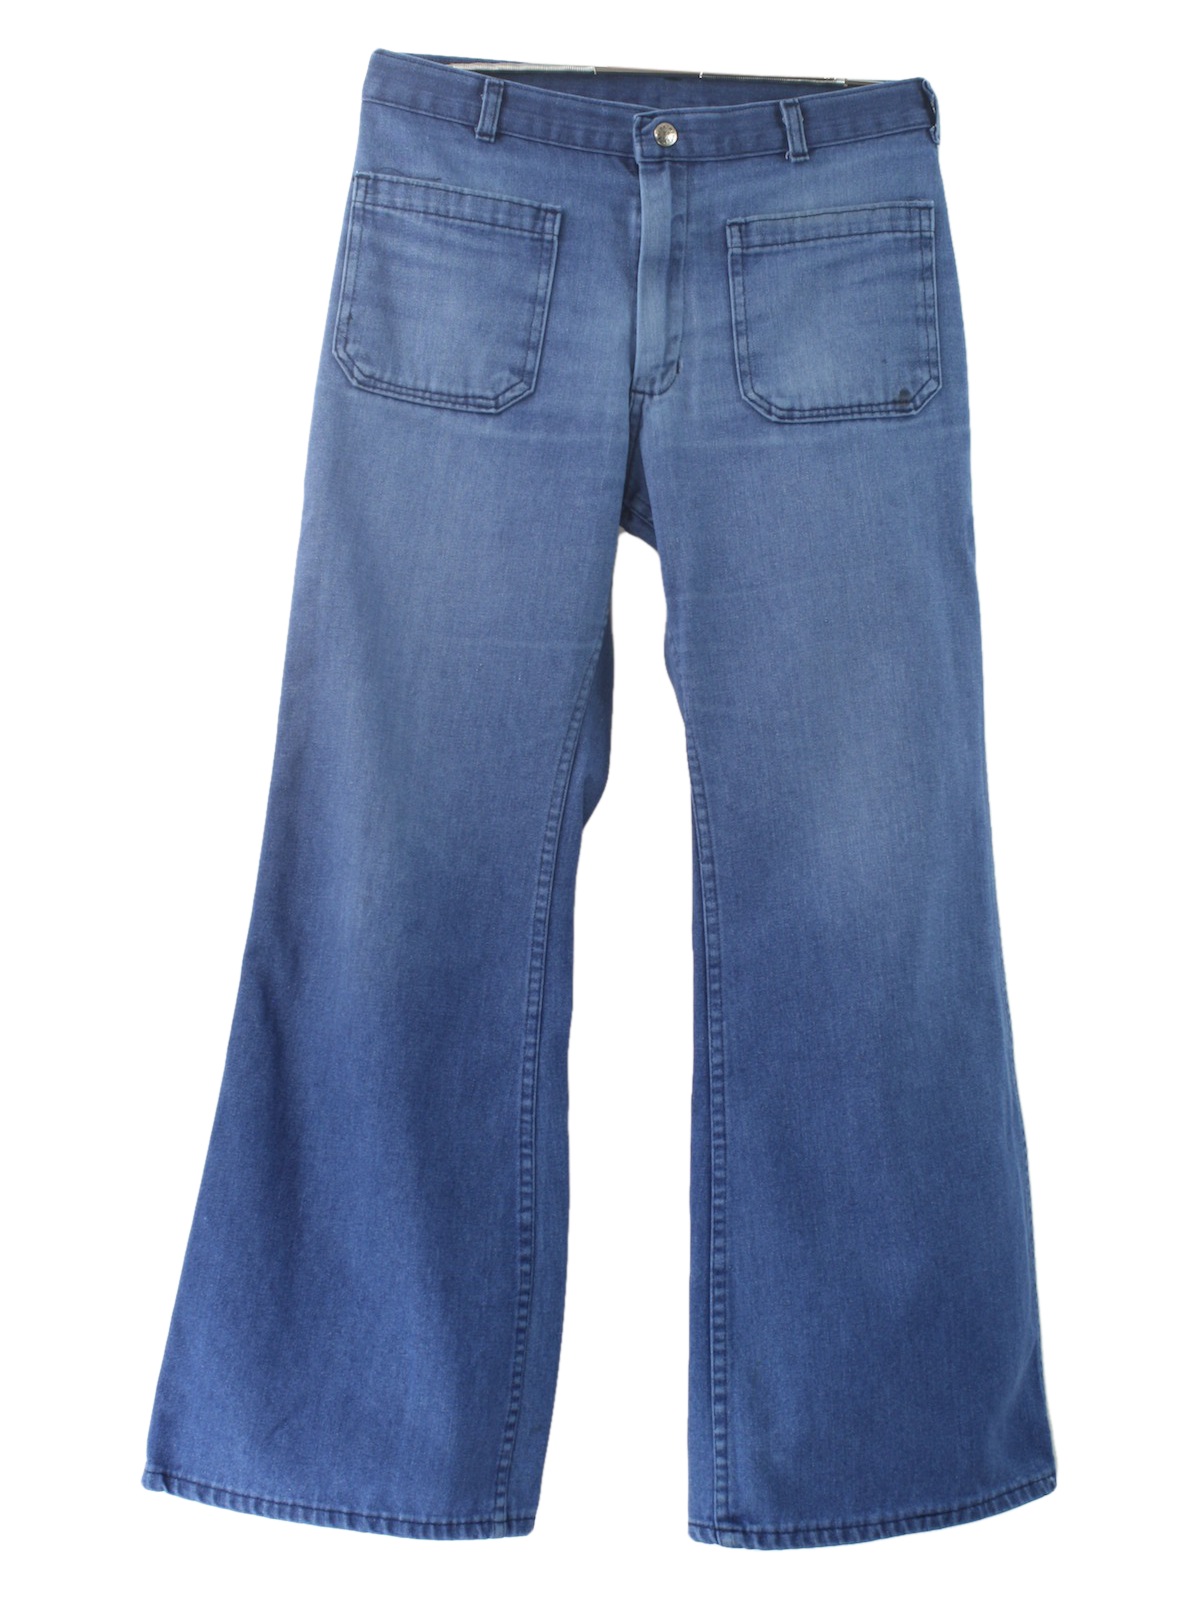 Retro 70's Bellbottom Pants: 70s -Navdungaree- Mens moderately faded ...